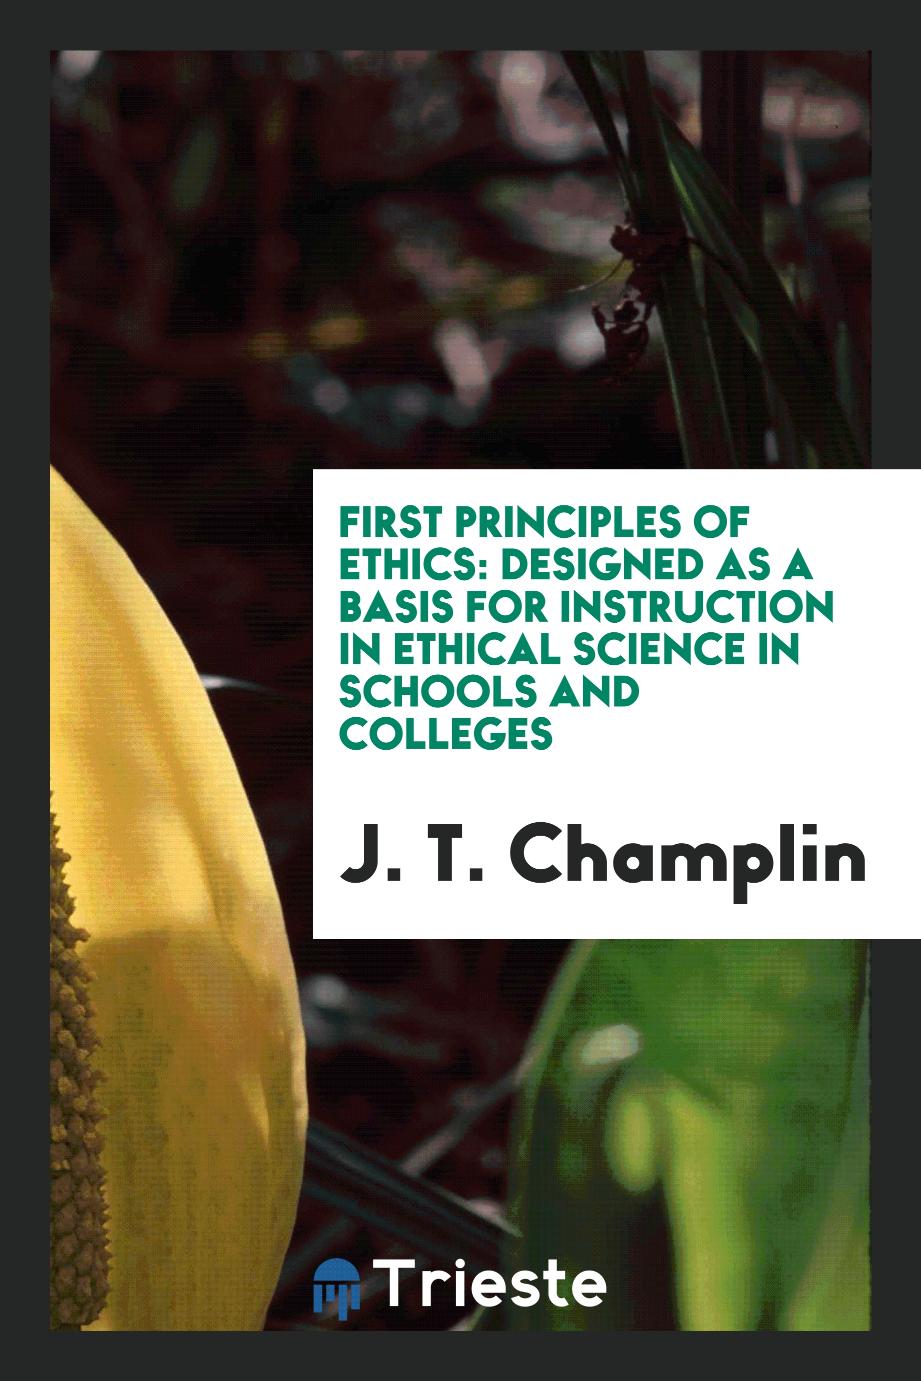 First principles of ethics: designed as a basis for instruction in ethical science in schools and colleges